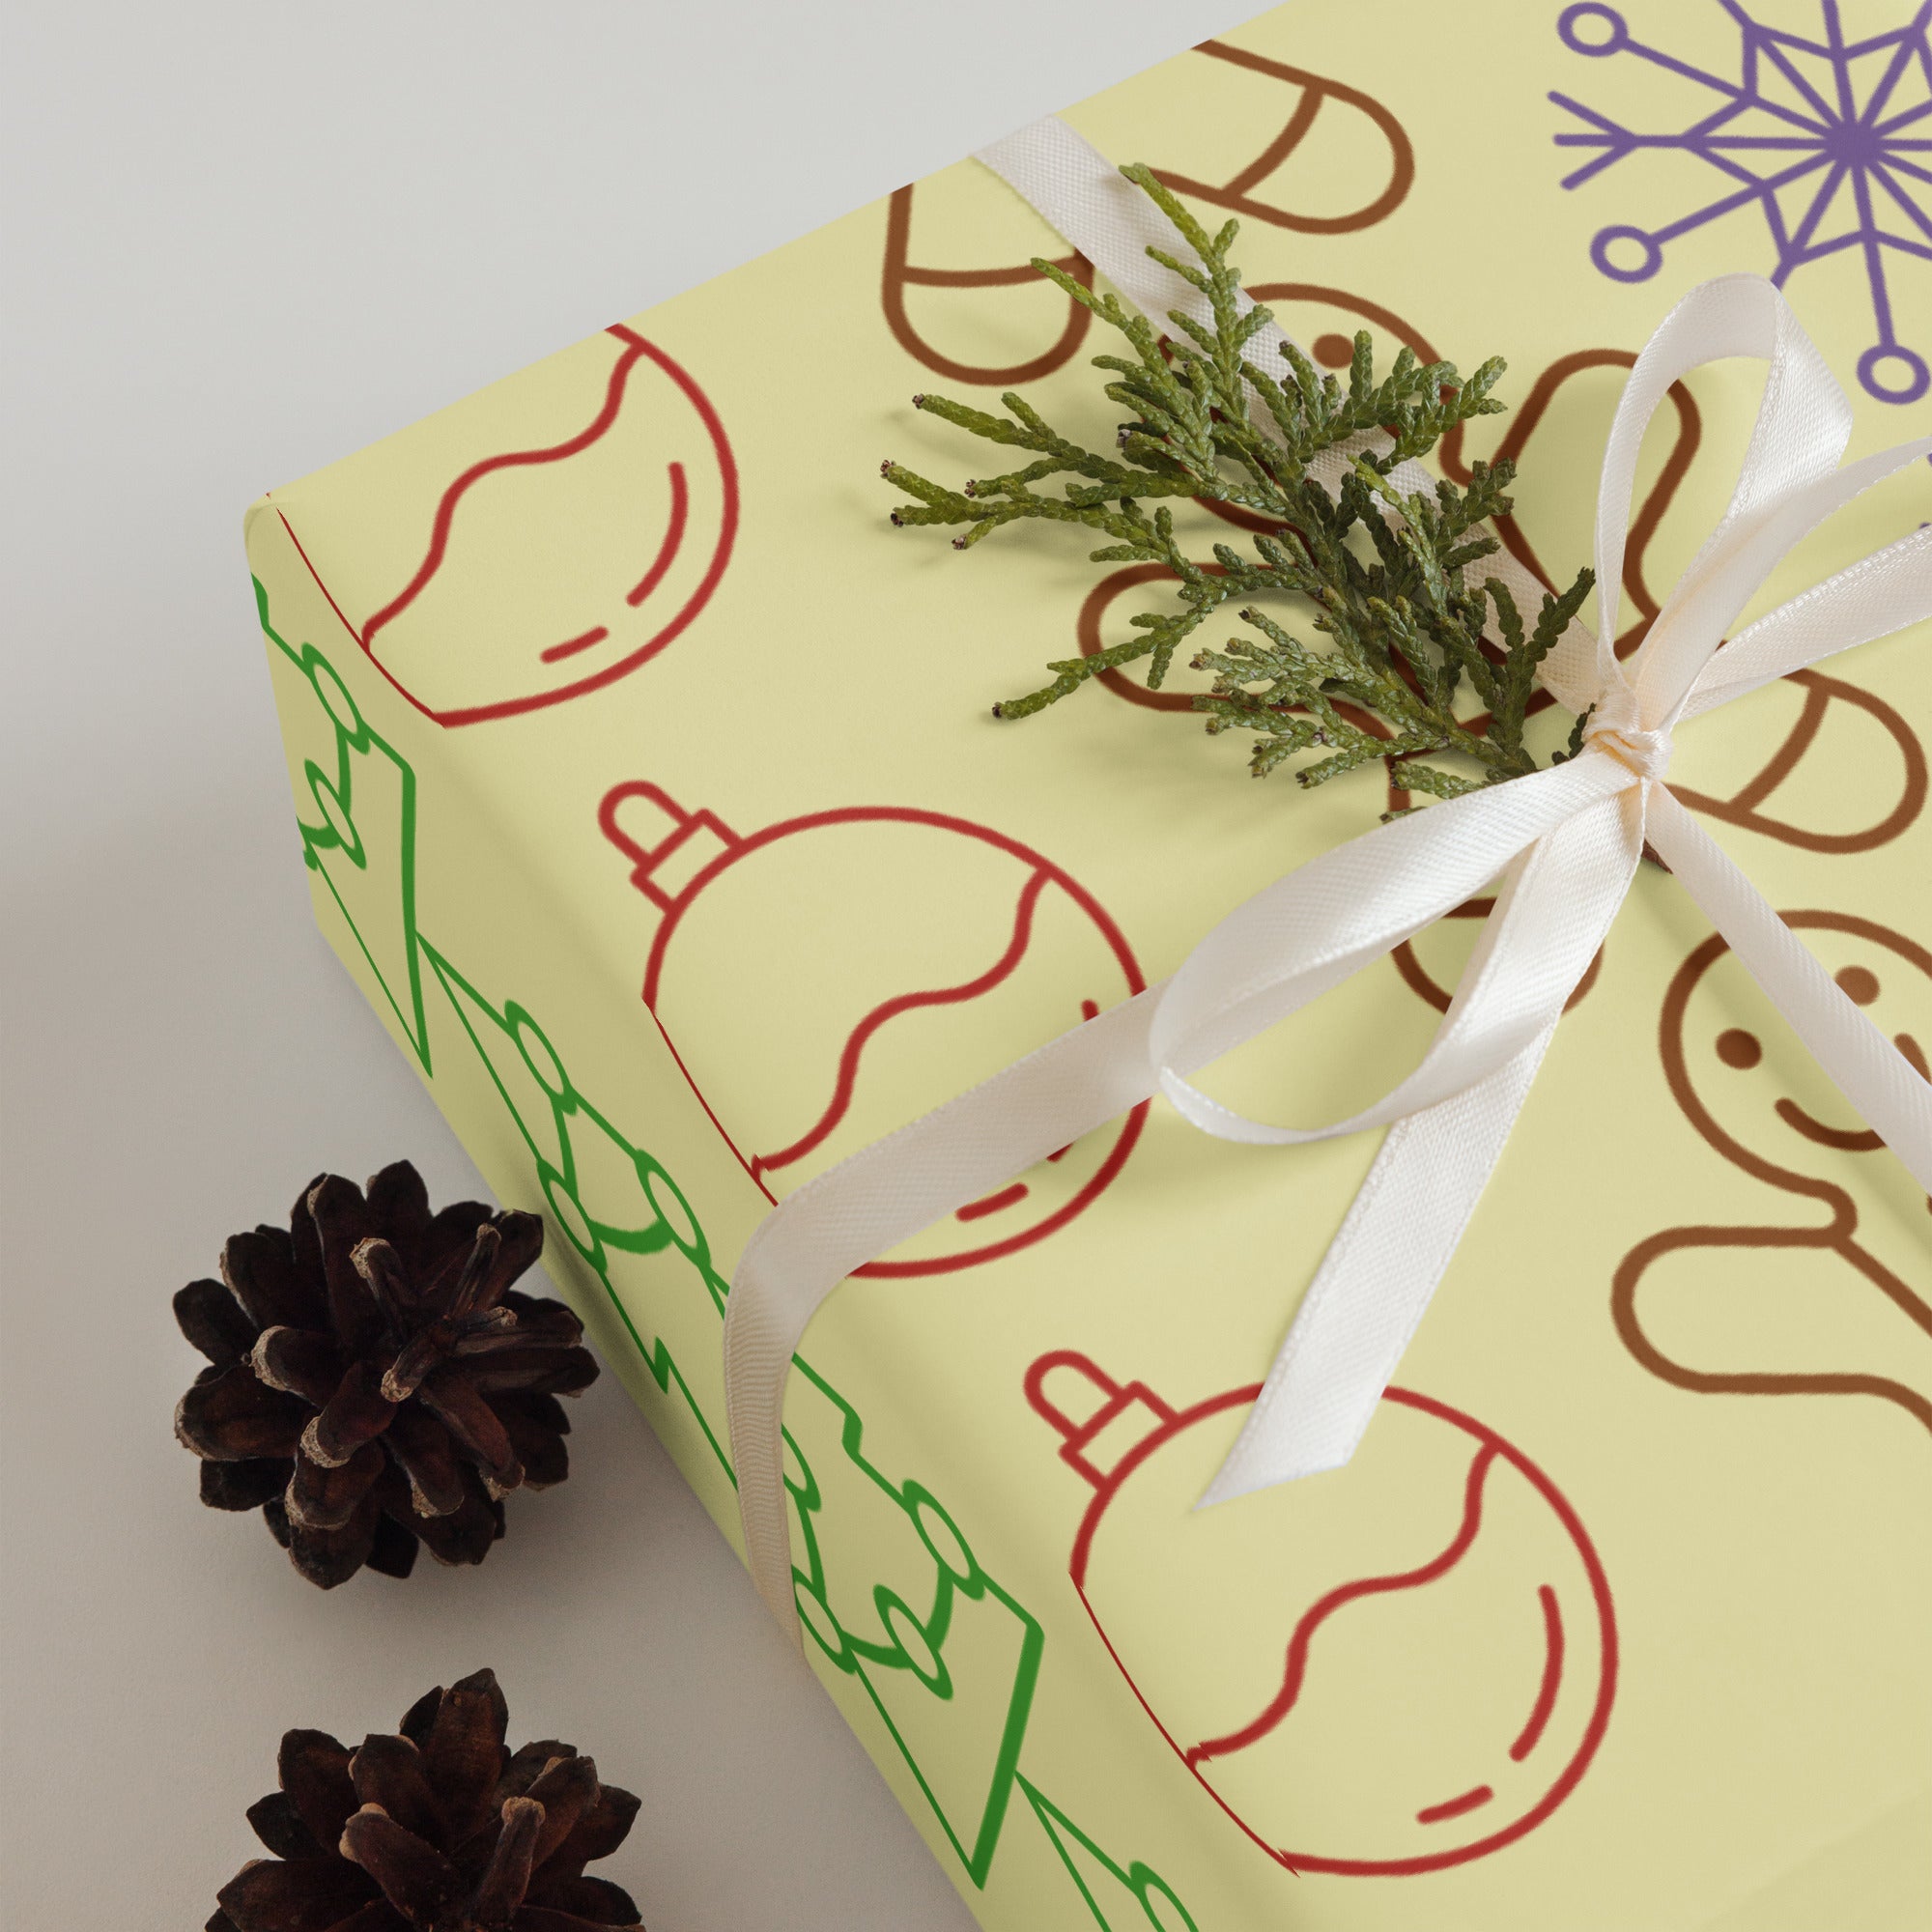 OPV Christmas Designs - Wrapping paper sheets